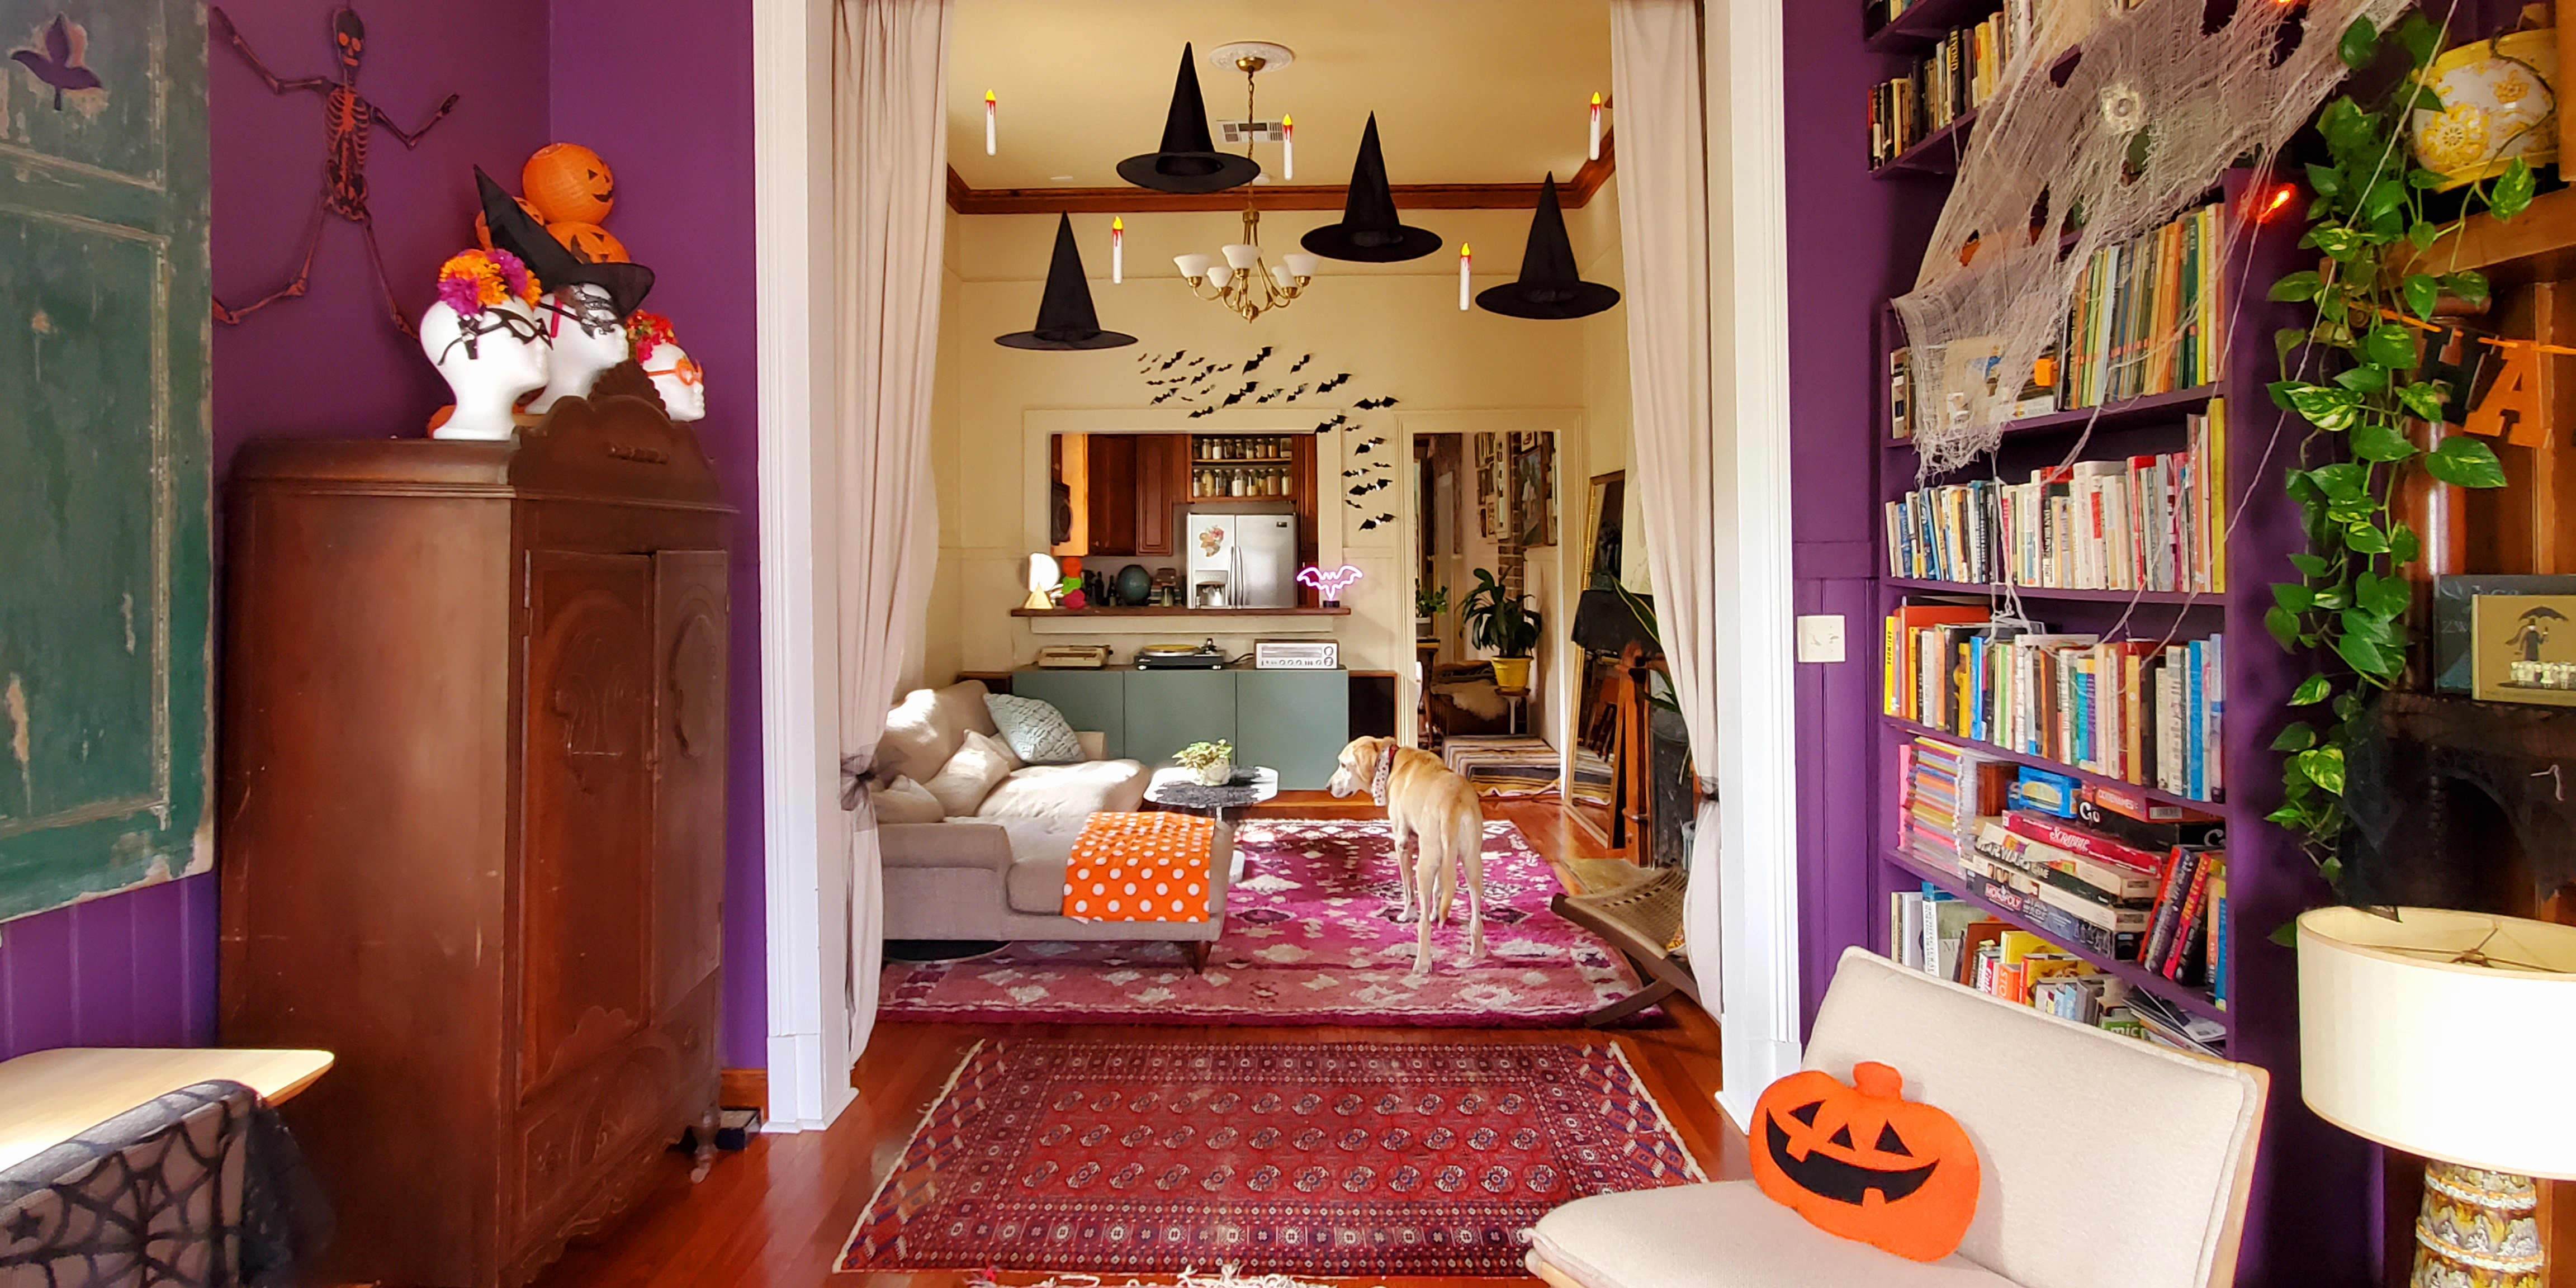 halloween is so close now so here's some last minute ideas to help! a